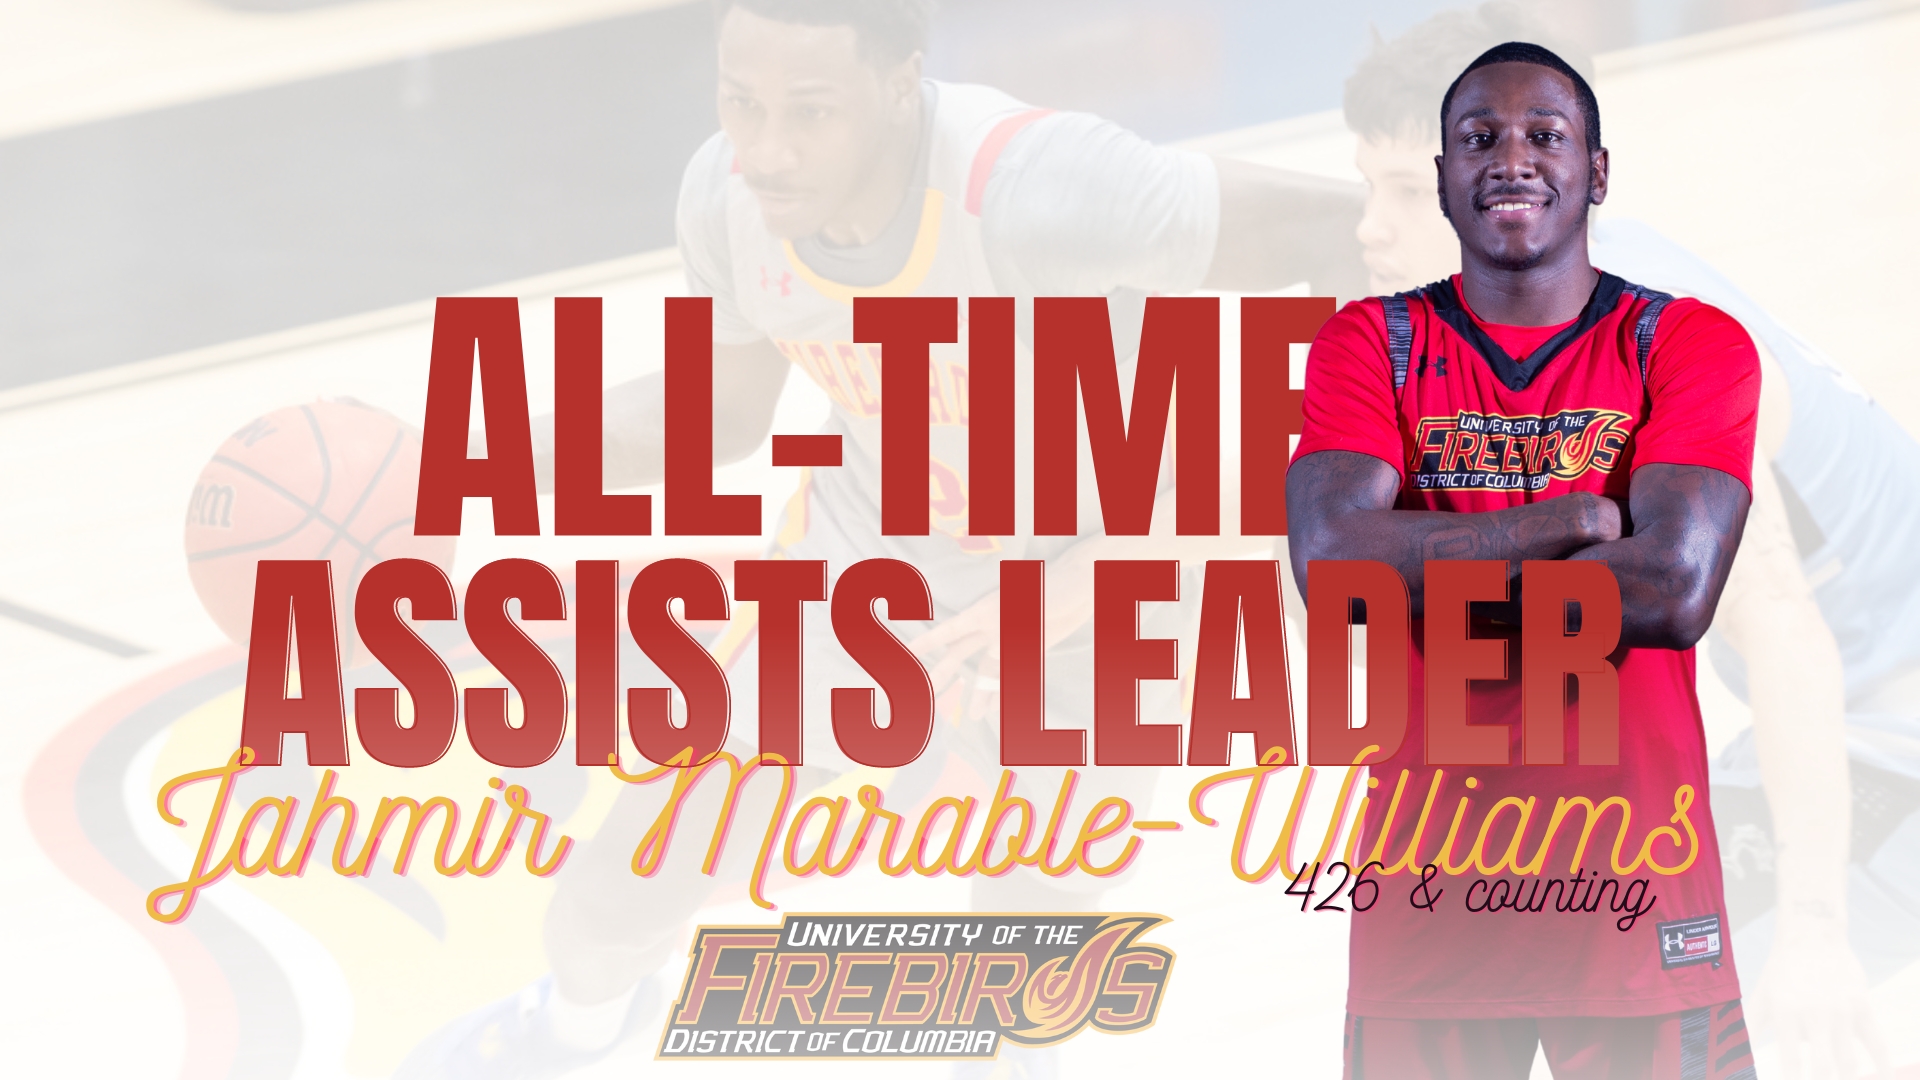 UDC Men's Basketball Point-Guard Jahmir Marable-Williams Cements himself in Firebird Record book as the All-Time Leader in Assists